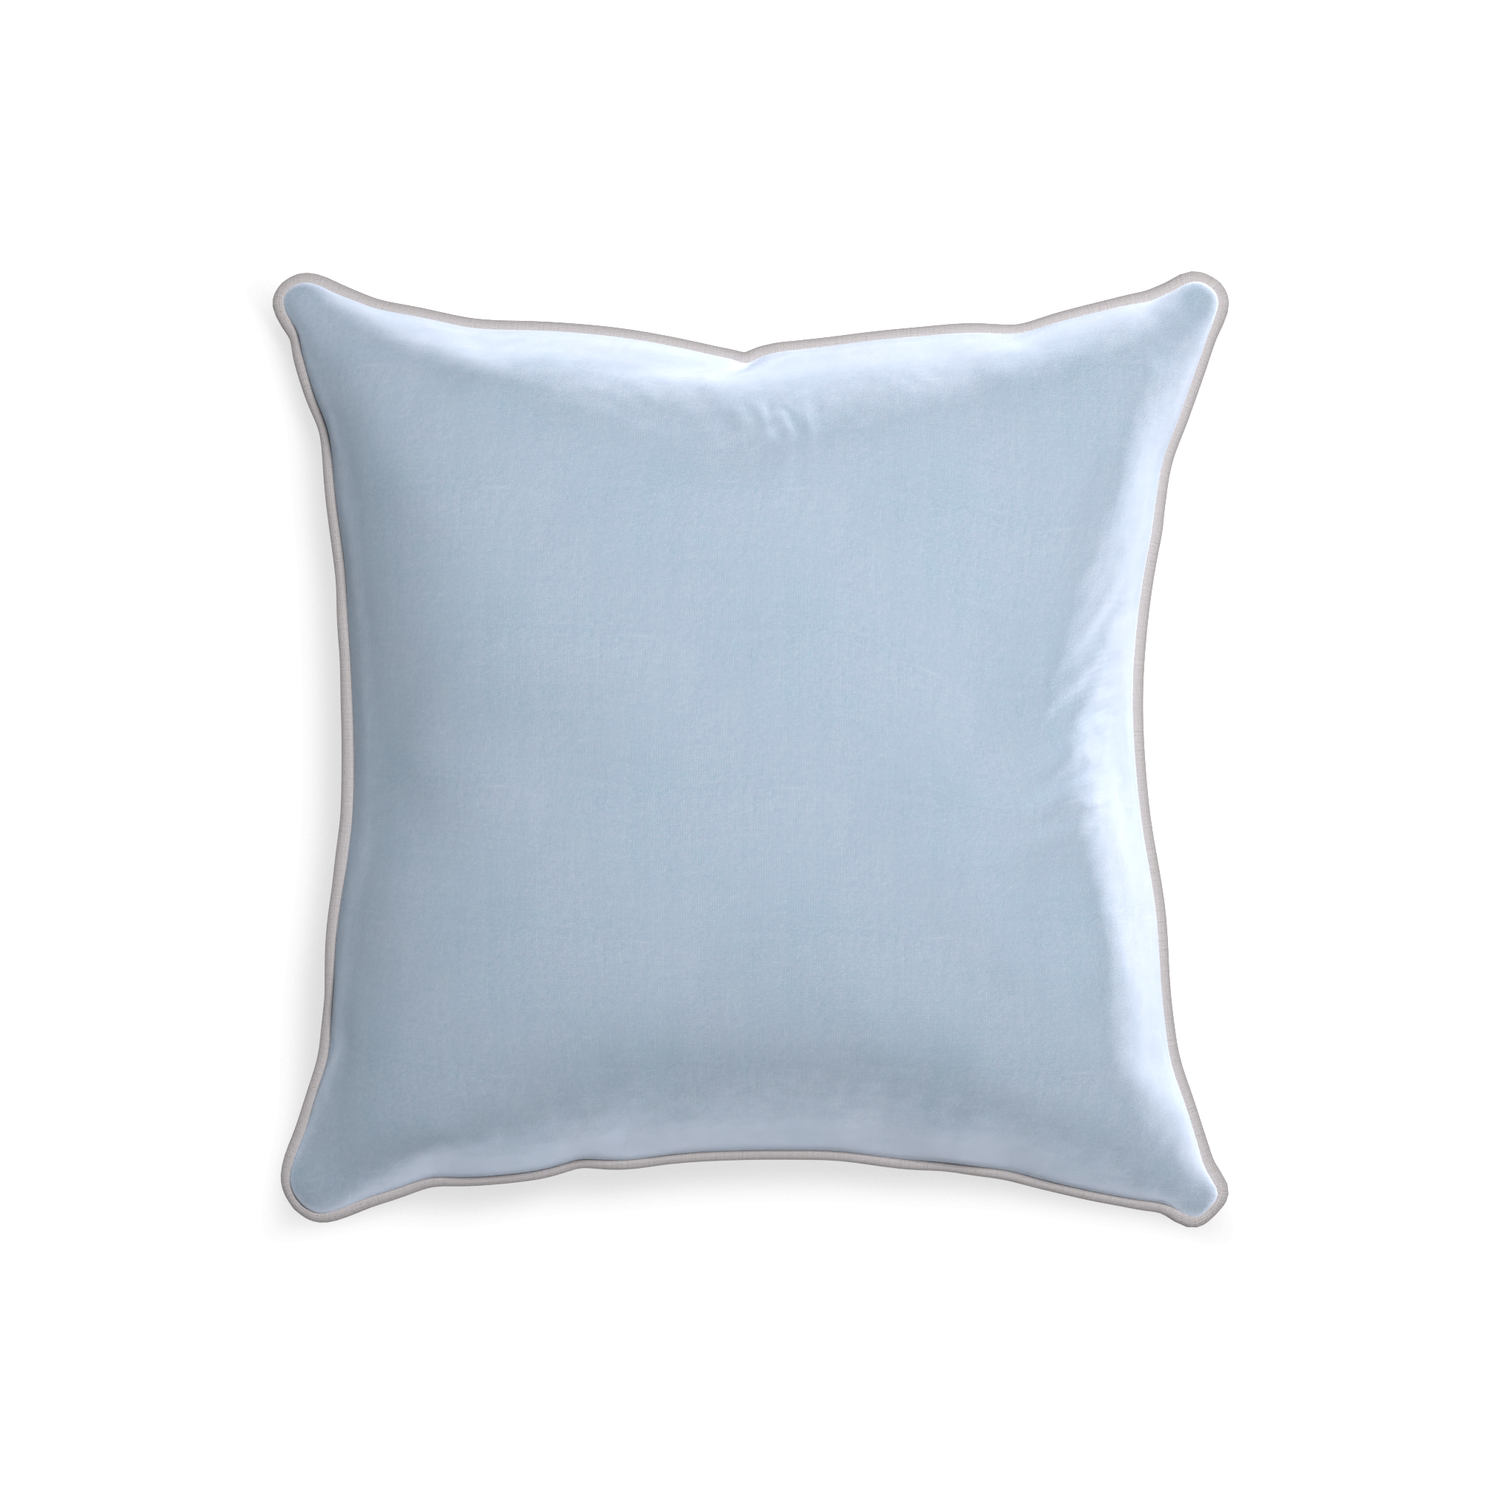 square light blue velvet pillow with grey piping